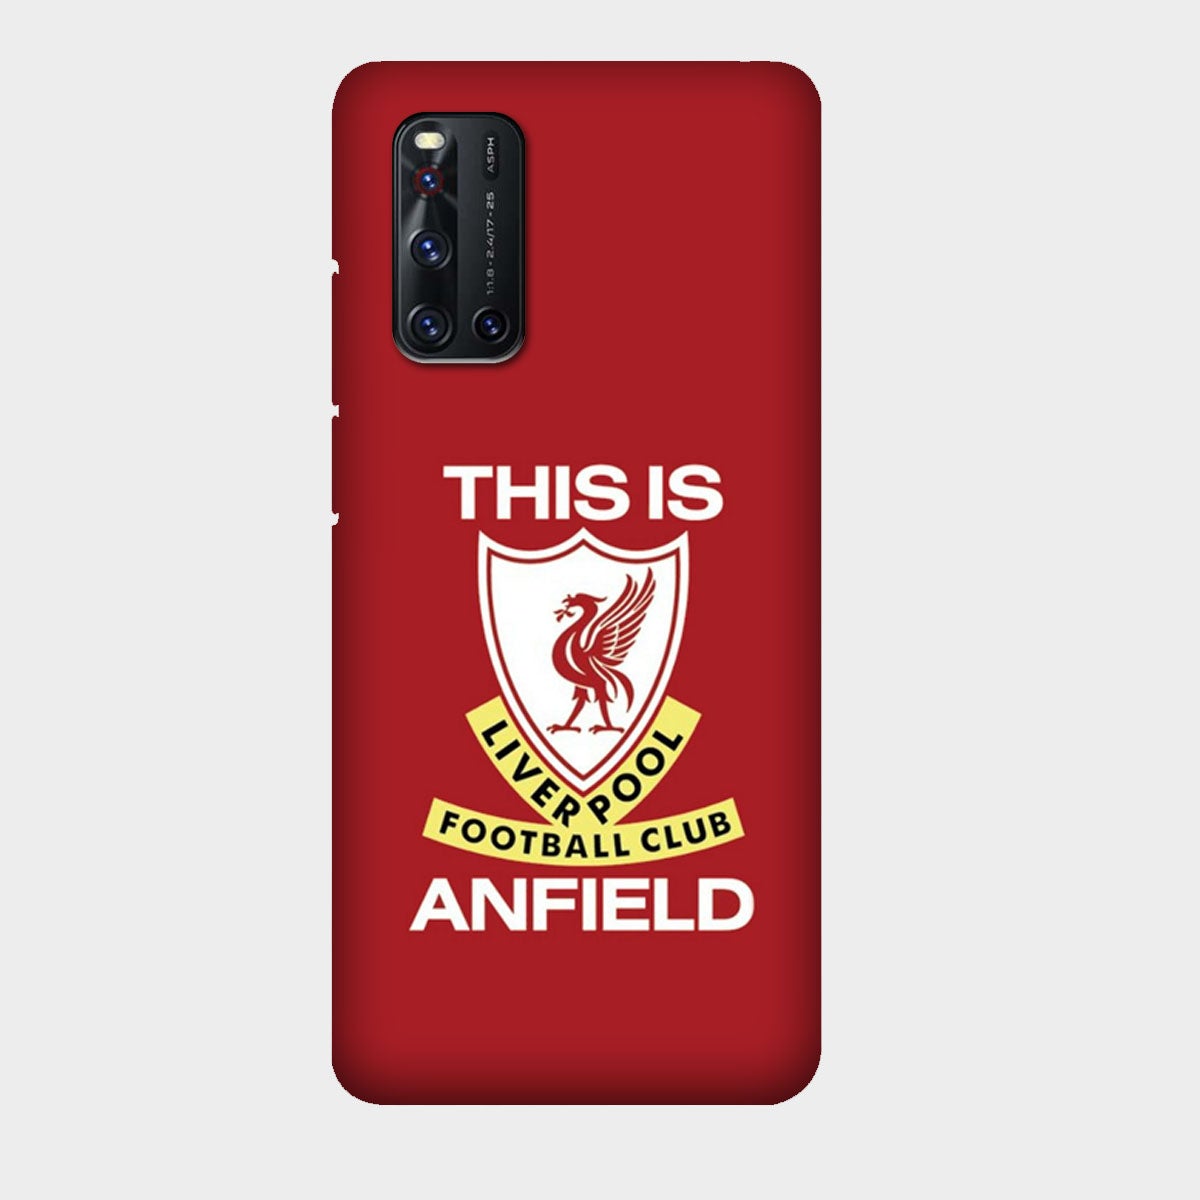 Liverpool - This is Anfield - Mobile Phone Cover - Hard Case - Vivo